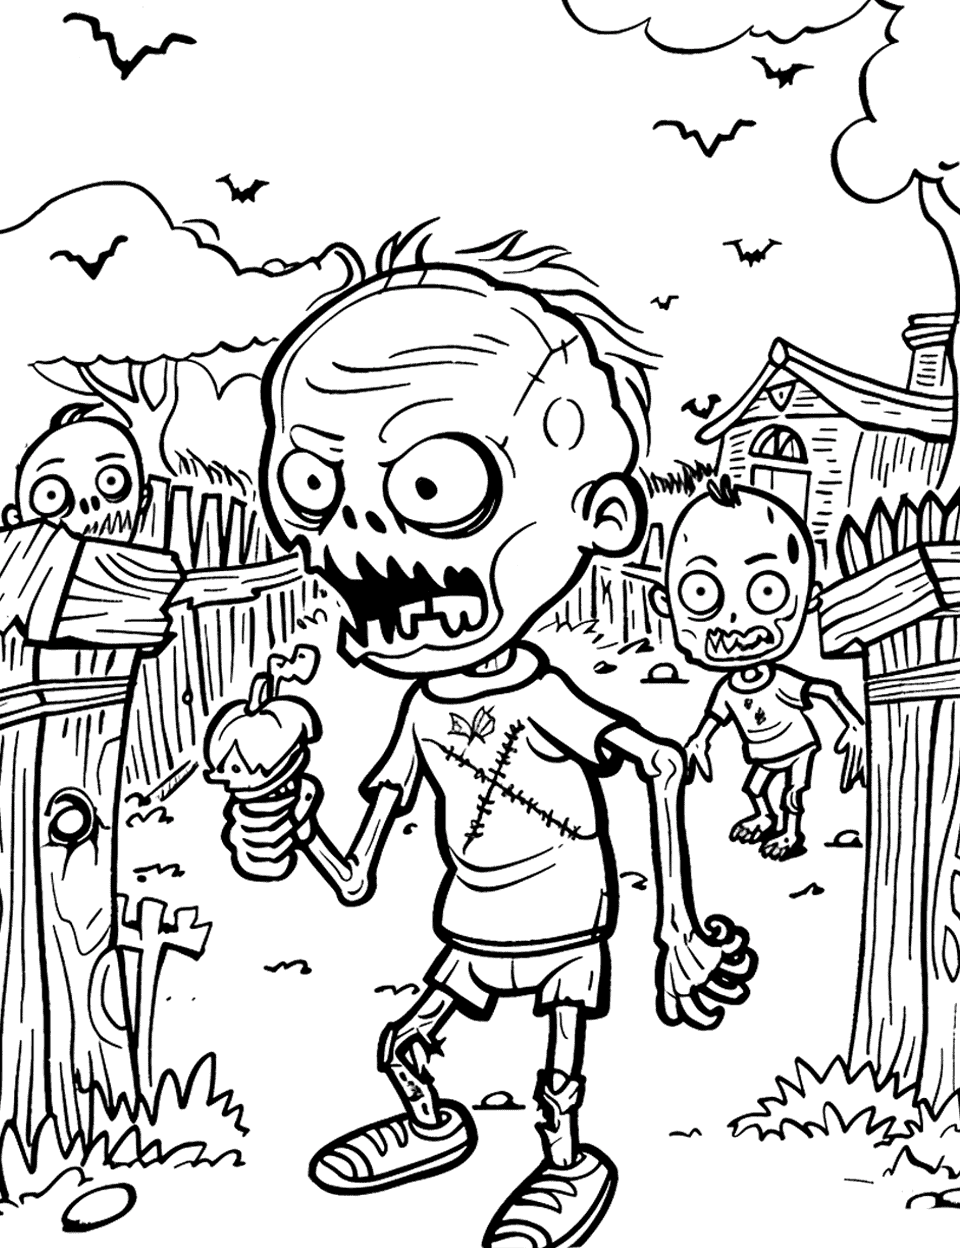 Halloween Zombie Party Coloring Page - Zombie dressed in Halloween costume having a party in a yard.